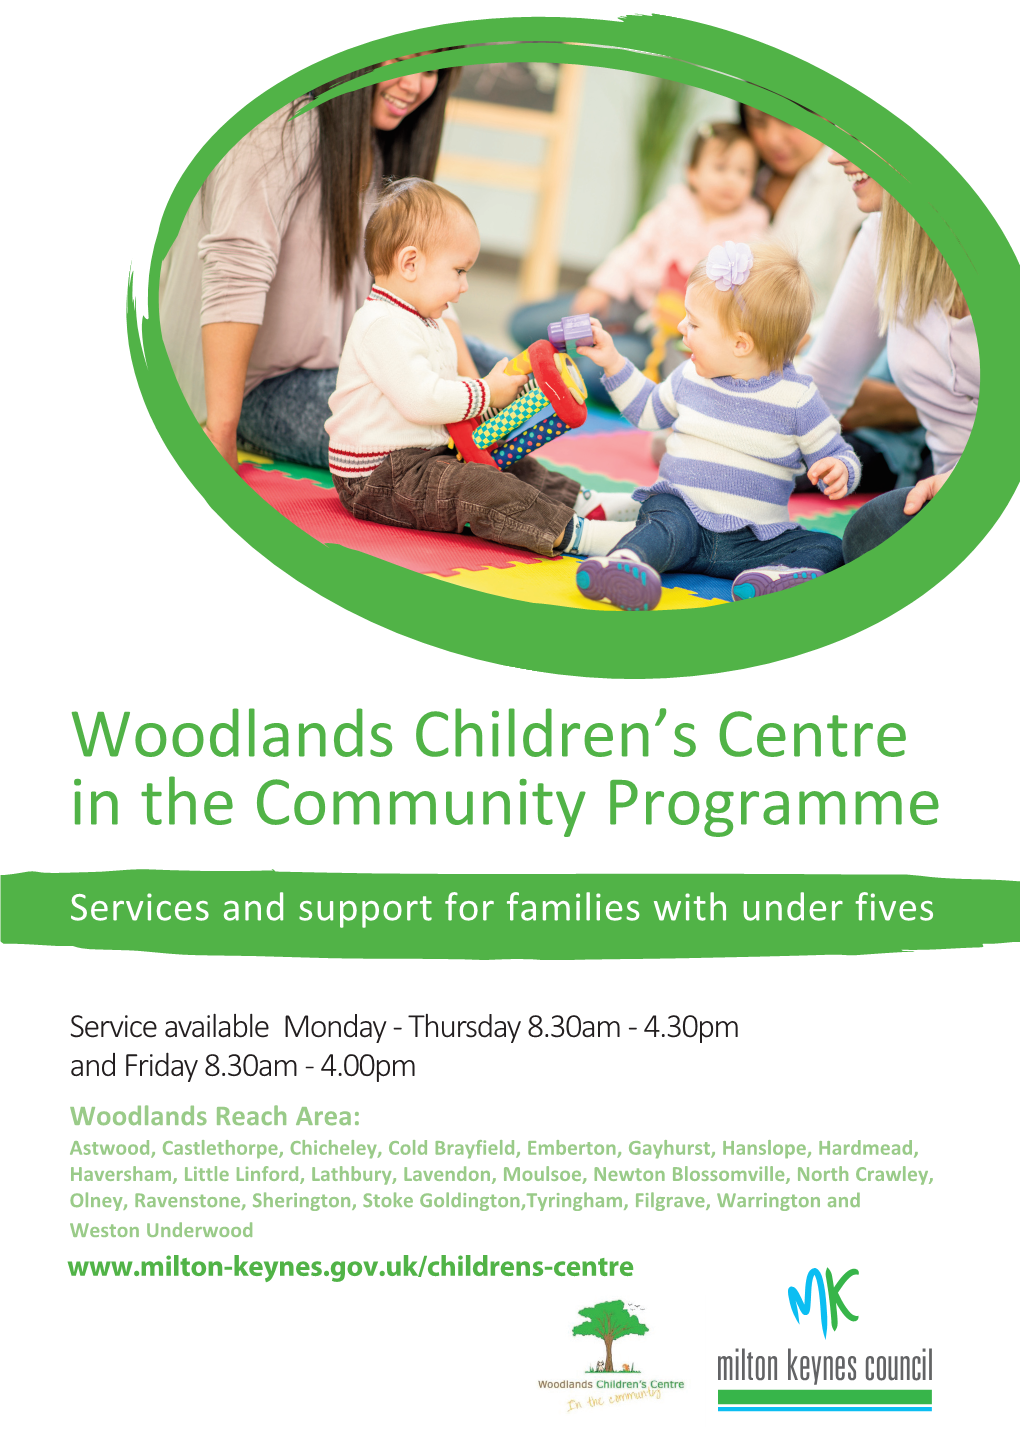 Woodlands Children's Centre in the Community Programme